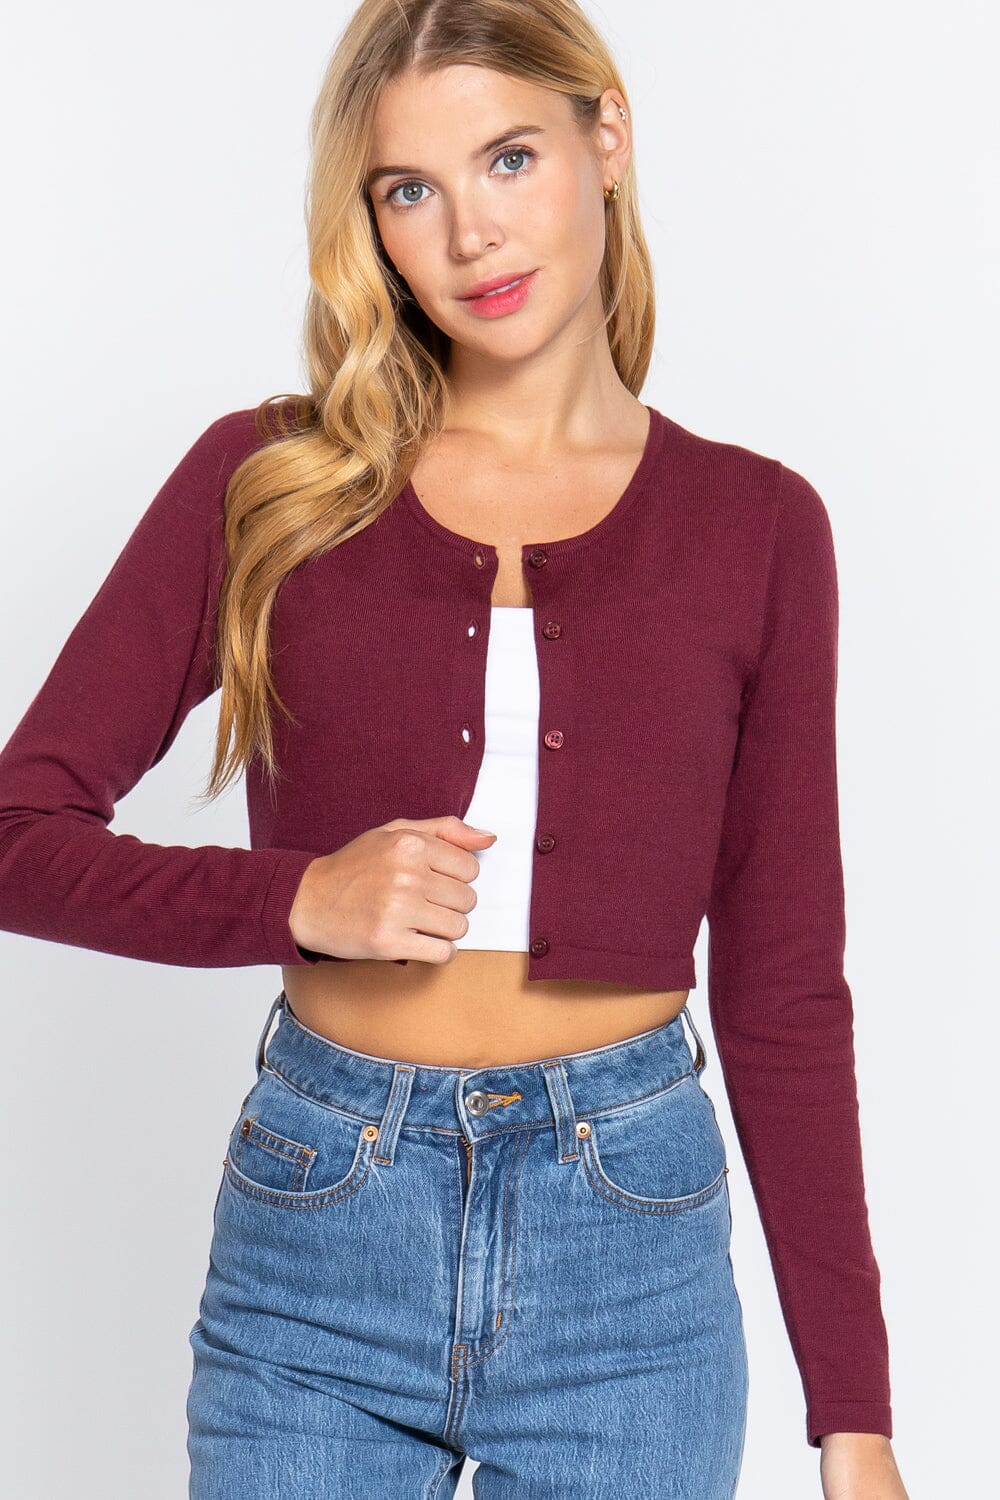 Burgundy Button Down Round Neck Long Sleeve Cropped Cardigan Sweaters_ Shirts & Tops jehouze 